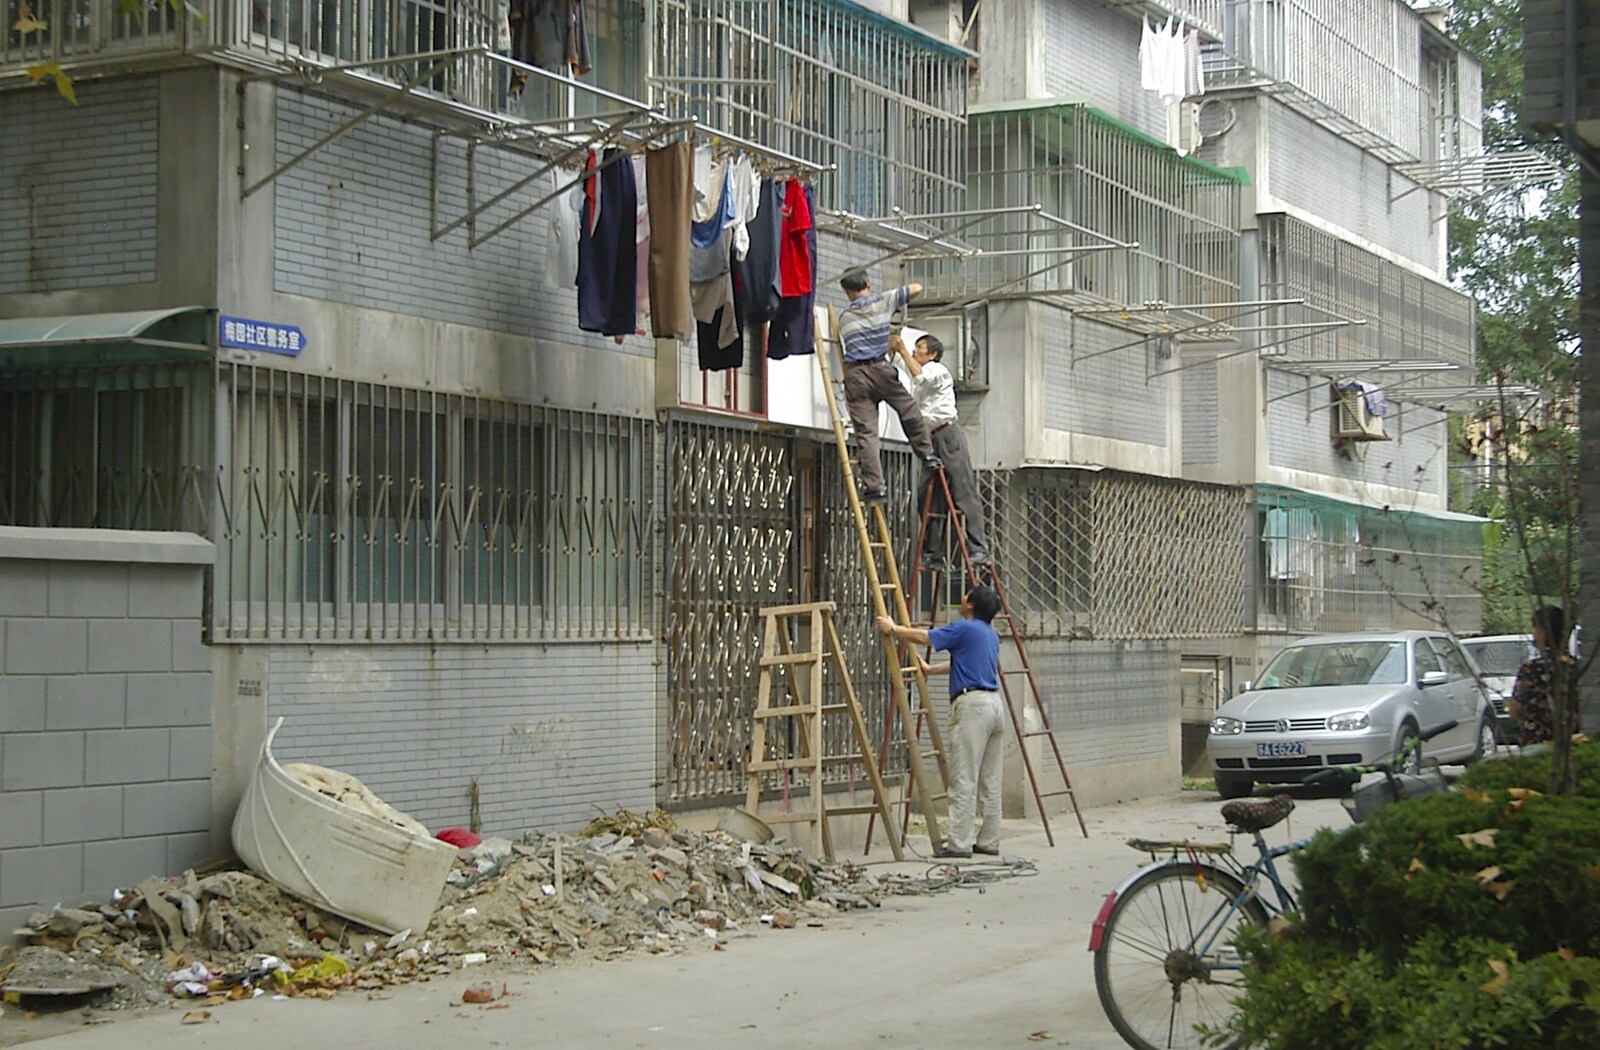 Dudes up a ladder talk animatedly about something from A Few Days in Nanjing, Jiangsu Province, China - 7th October 2006